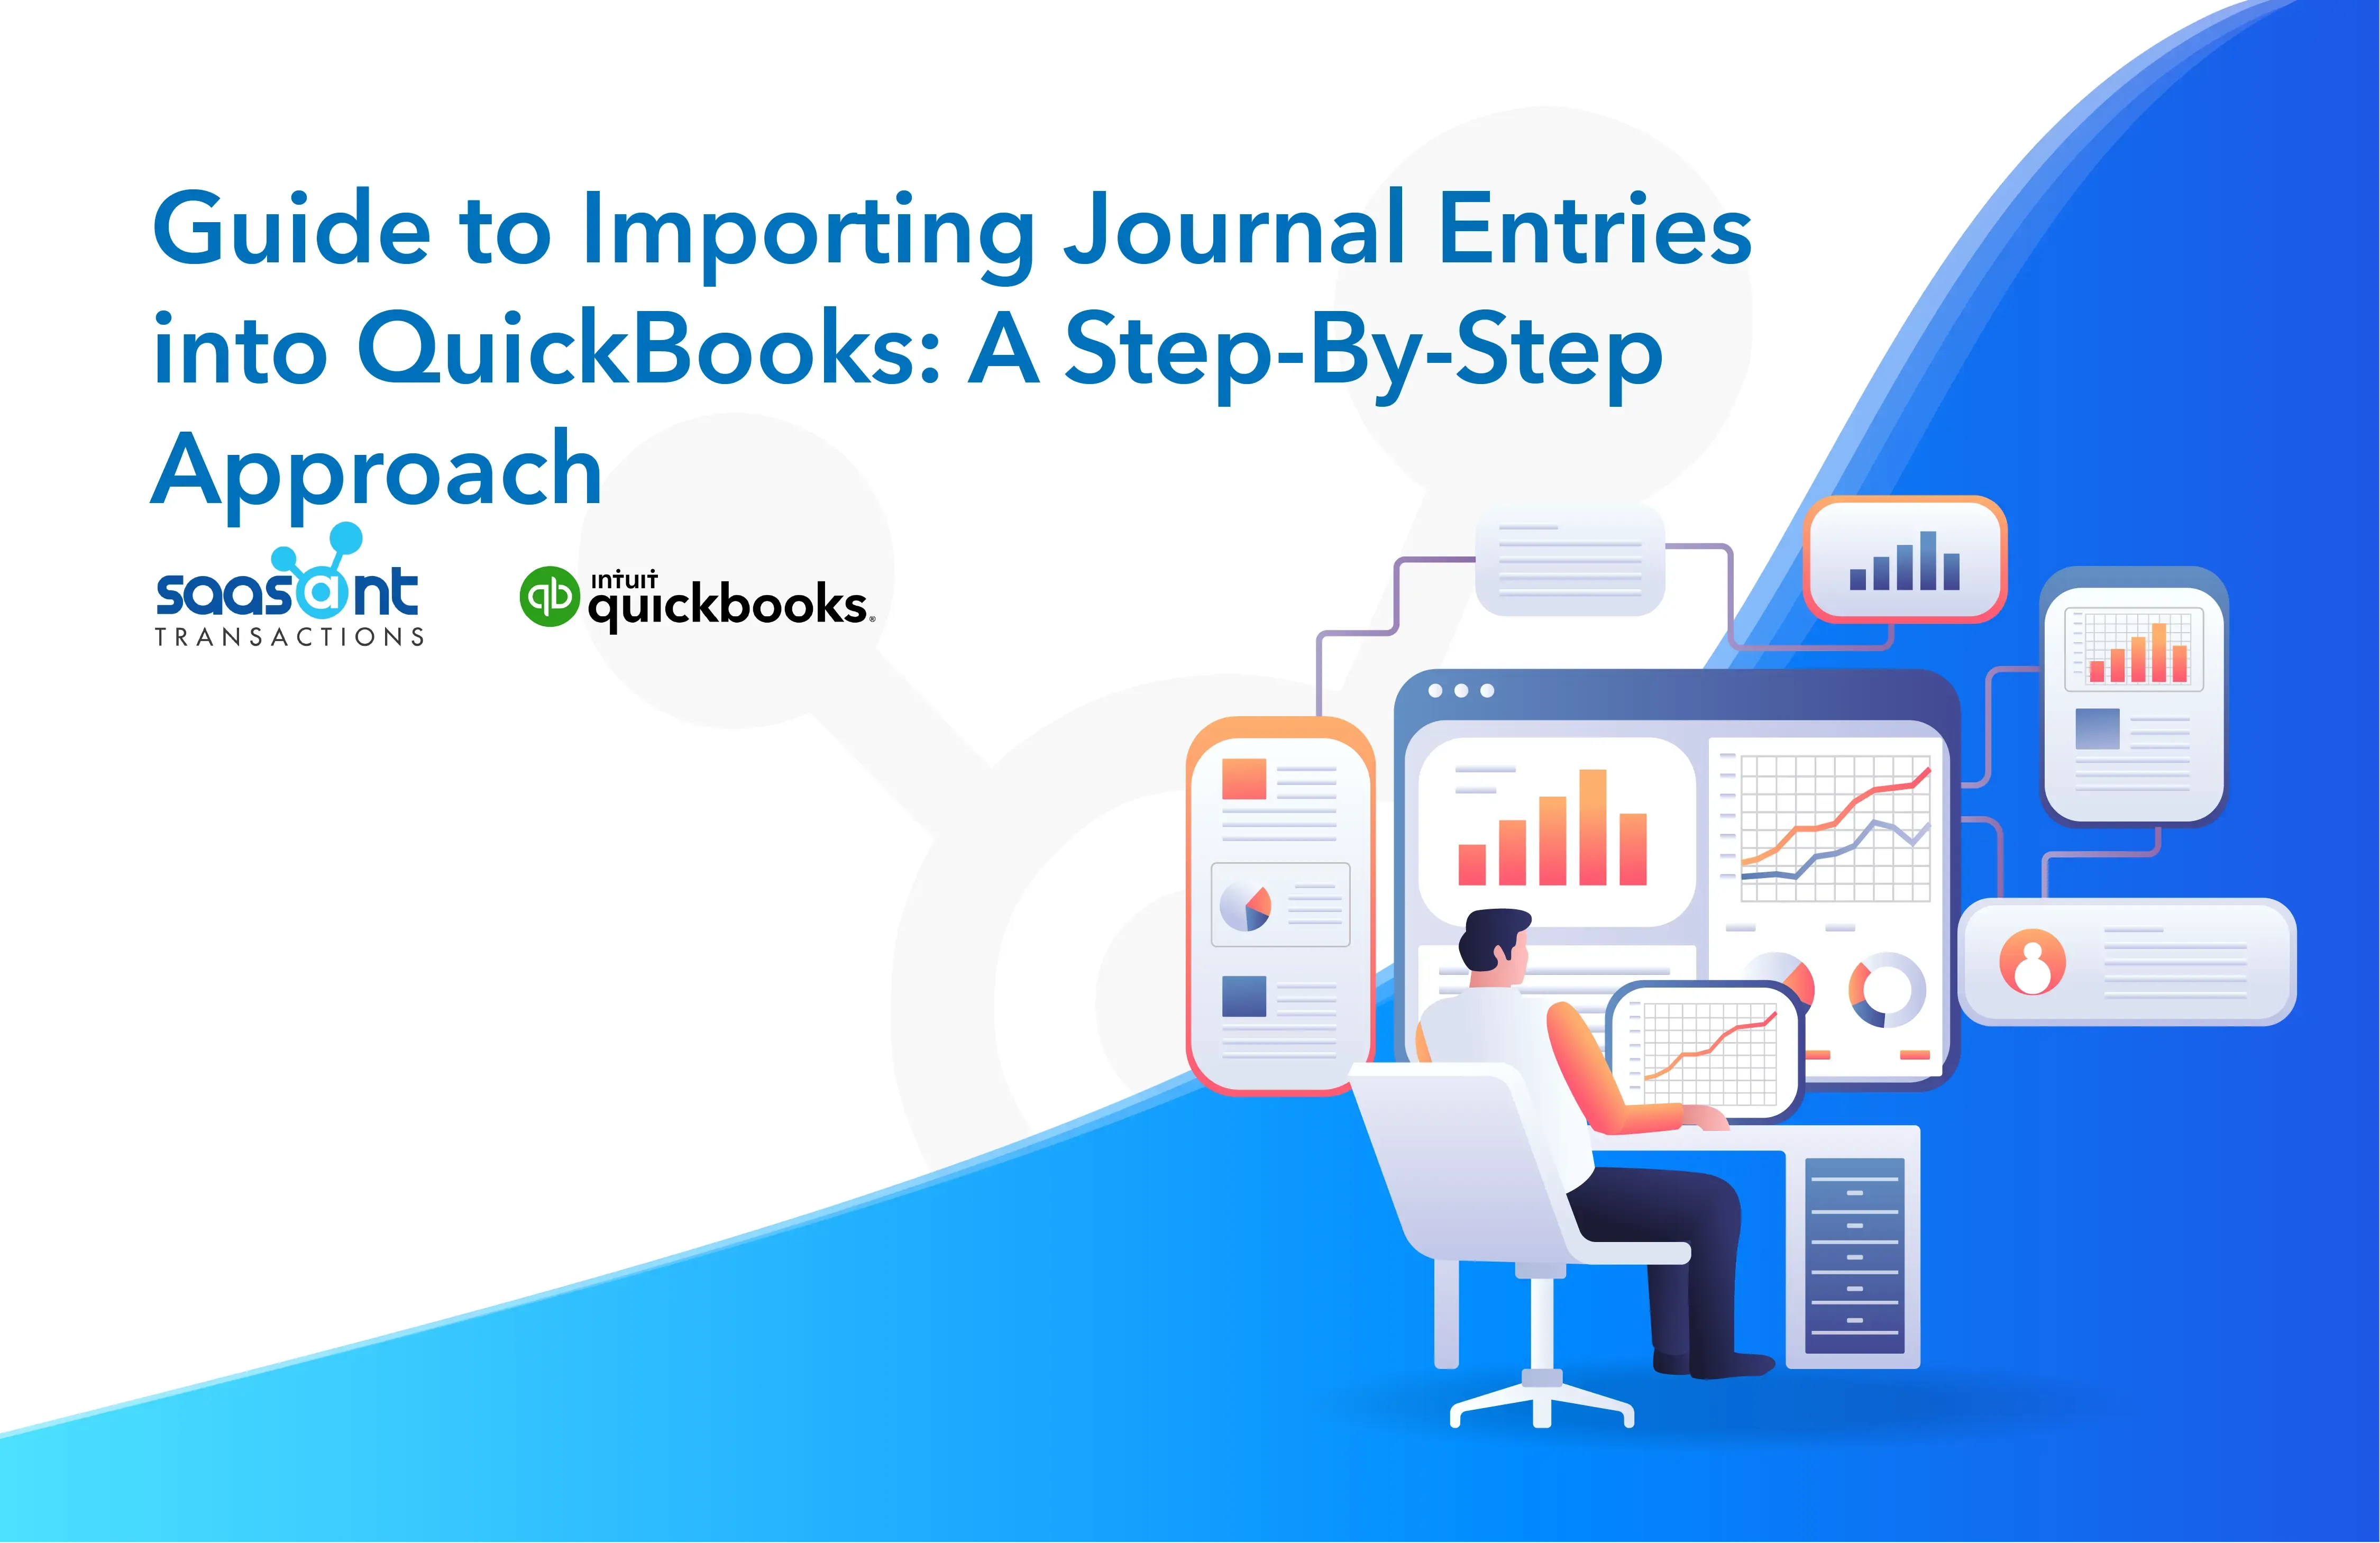 blog_images1703128829140_Guide-to-Importing-Journal-Entries-into-QuickBooks-A-Step-By-Step-Approach.webp